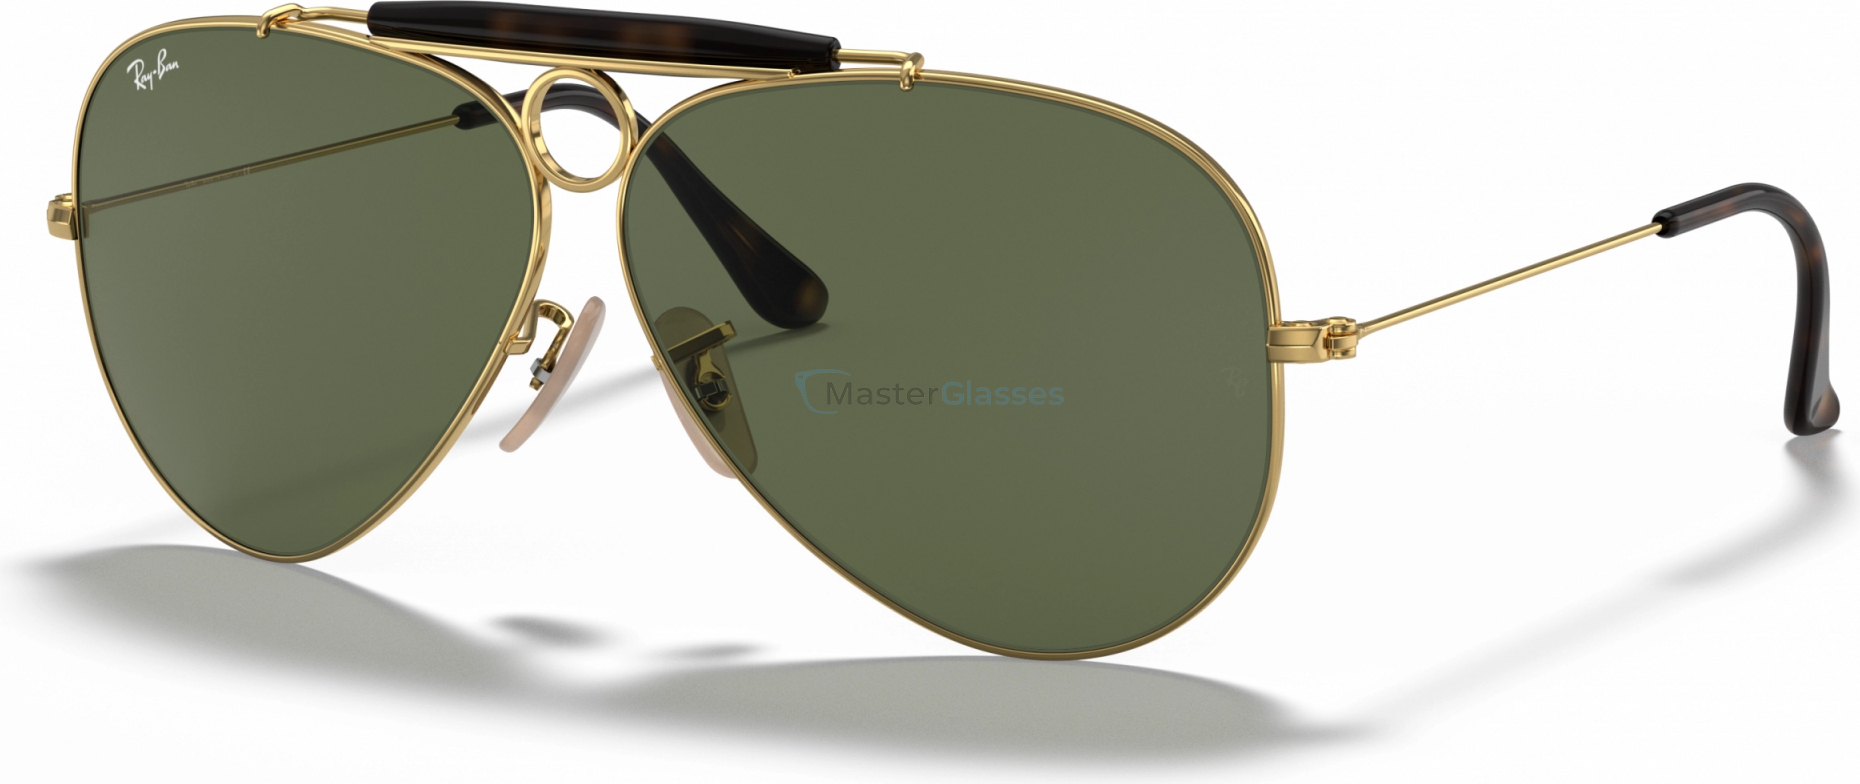   Ray-Ban SHOOTER RB3138 181 Gold